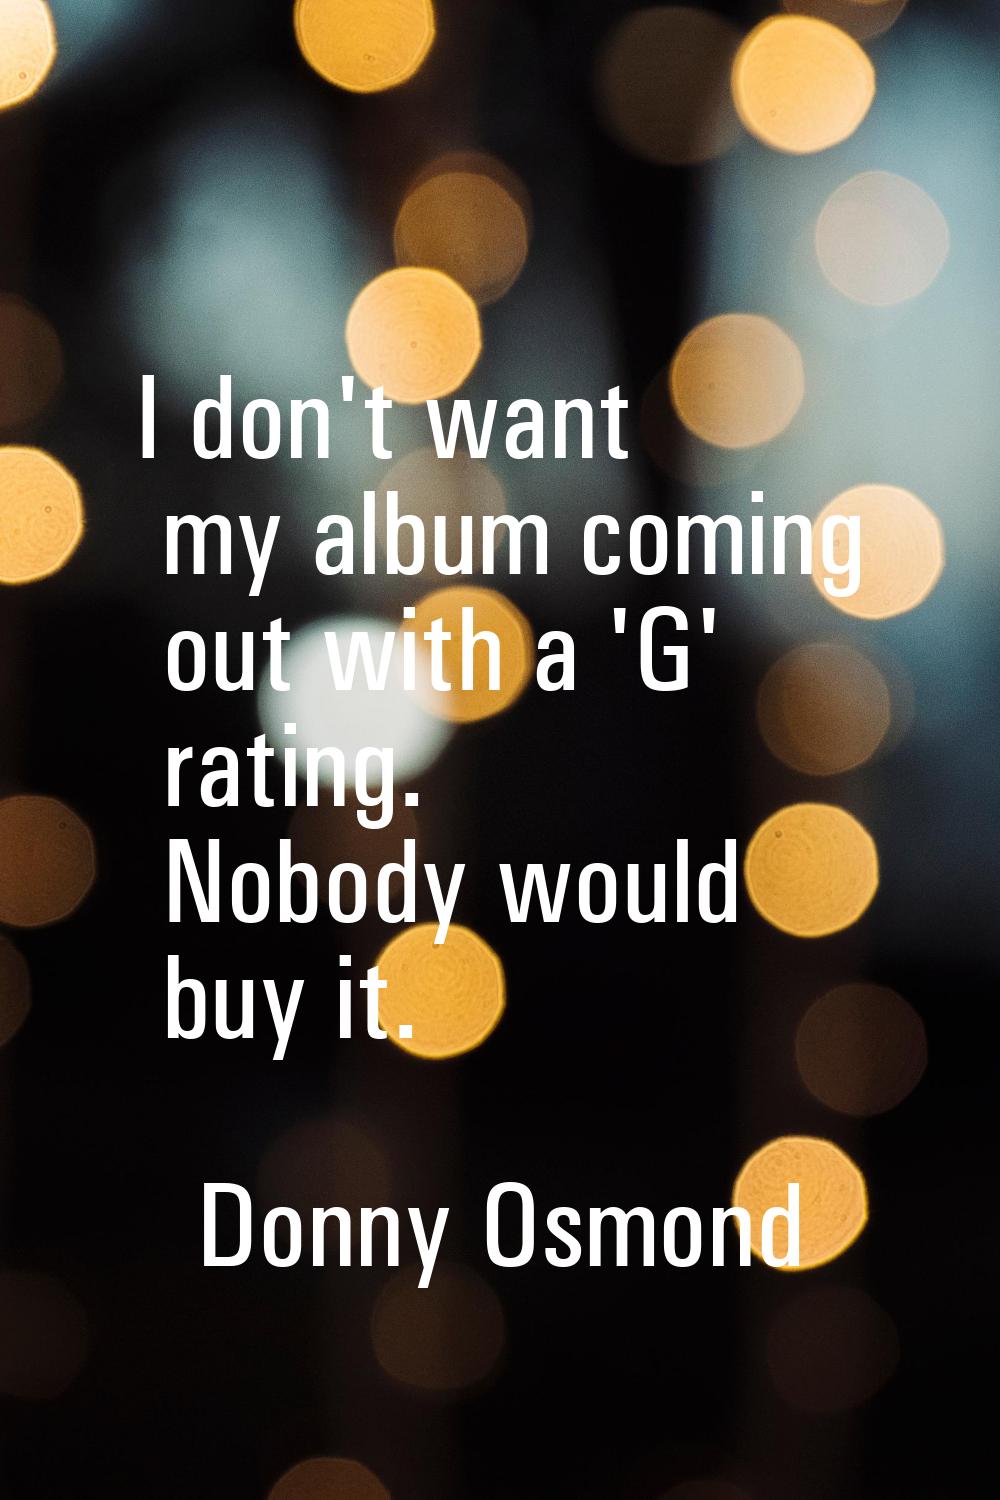 I don't want my album coming out with a 'G' rating. Nobody would buy it.